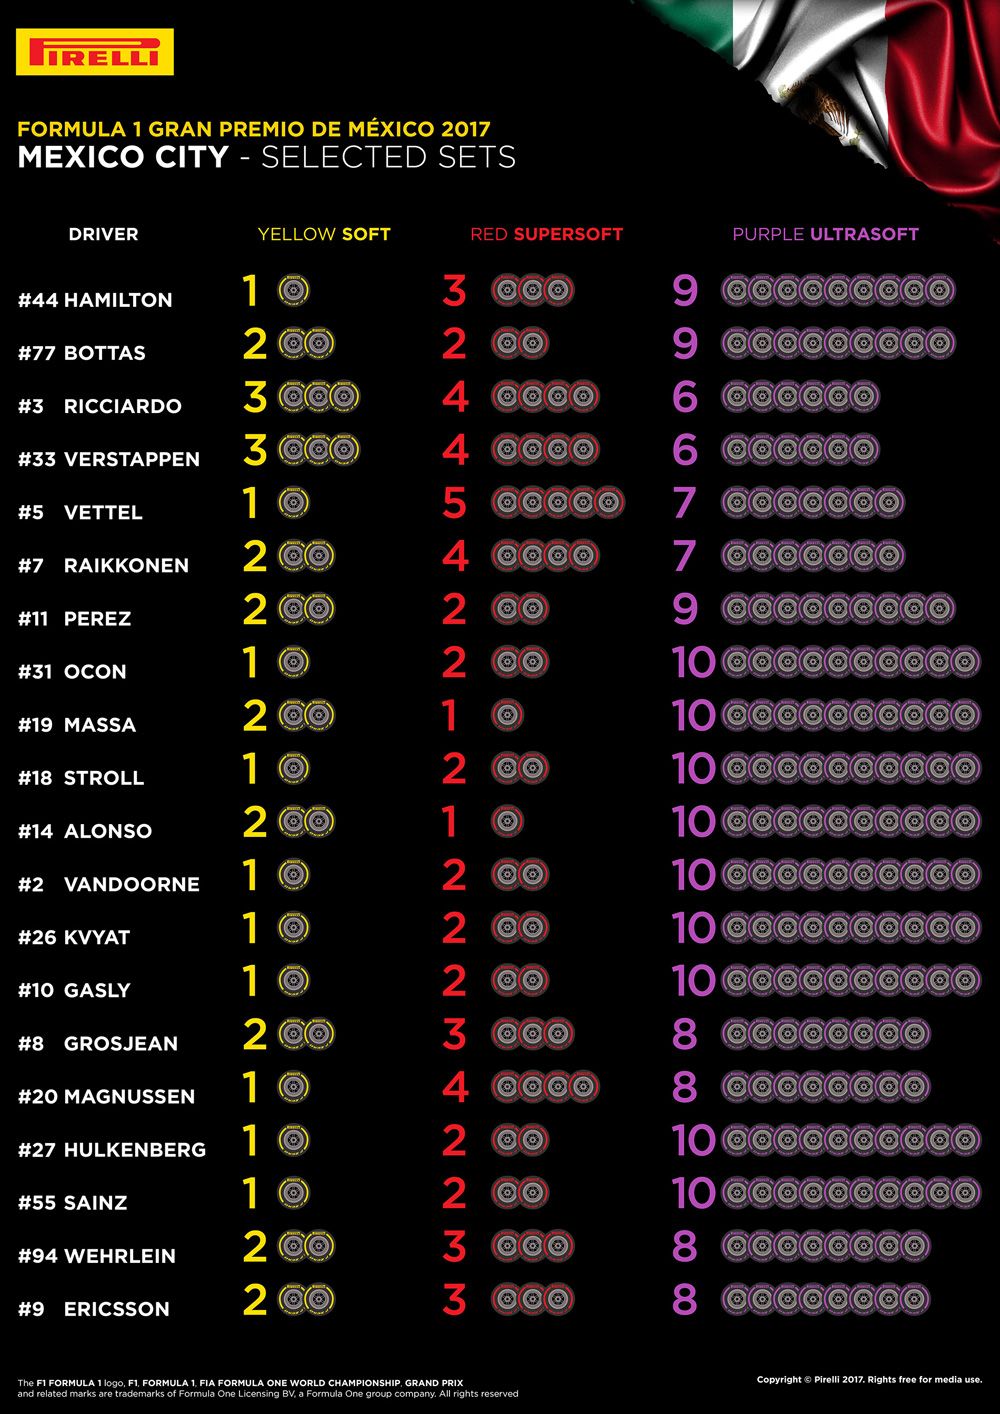 Selected tyres for teams and drivers for 2017 Mexico Grand Prix